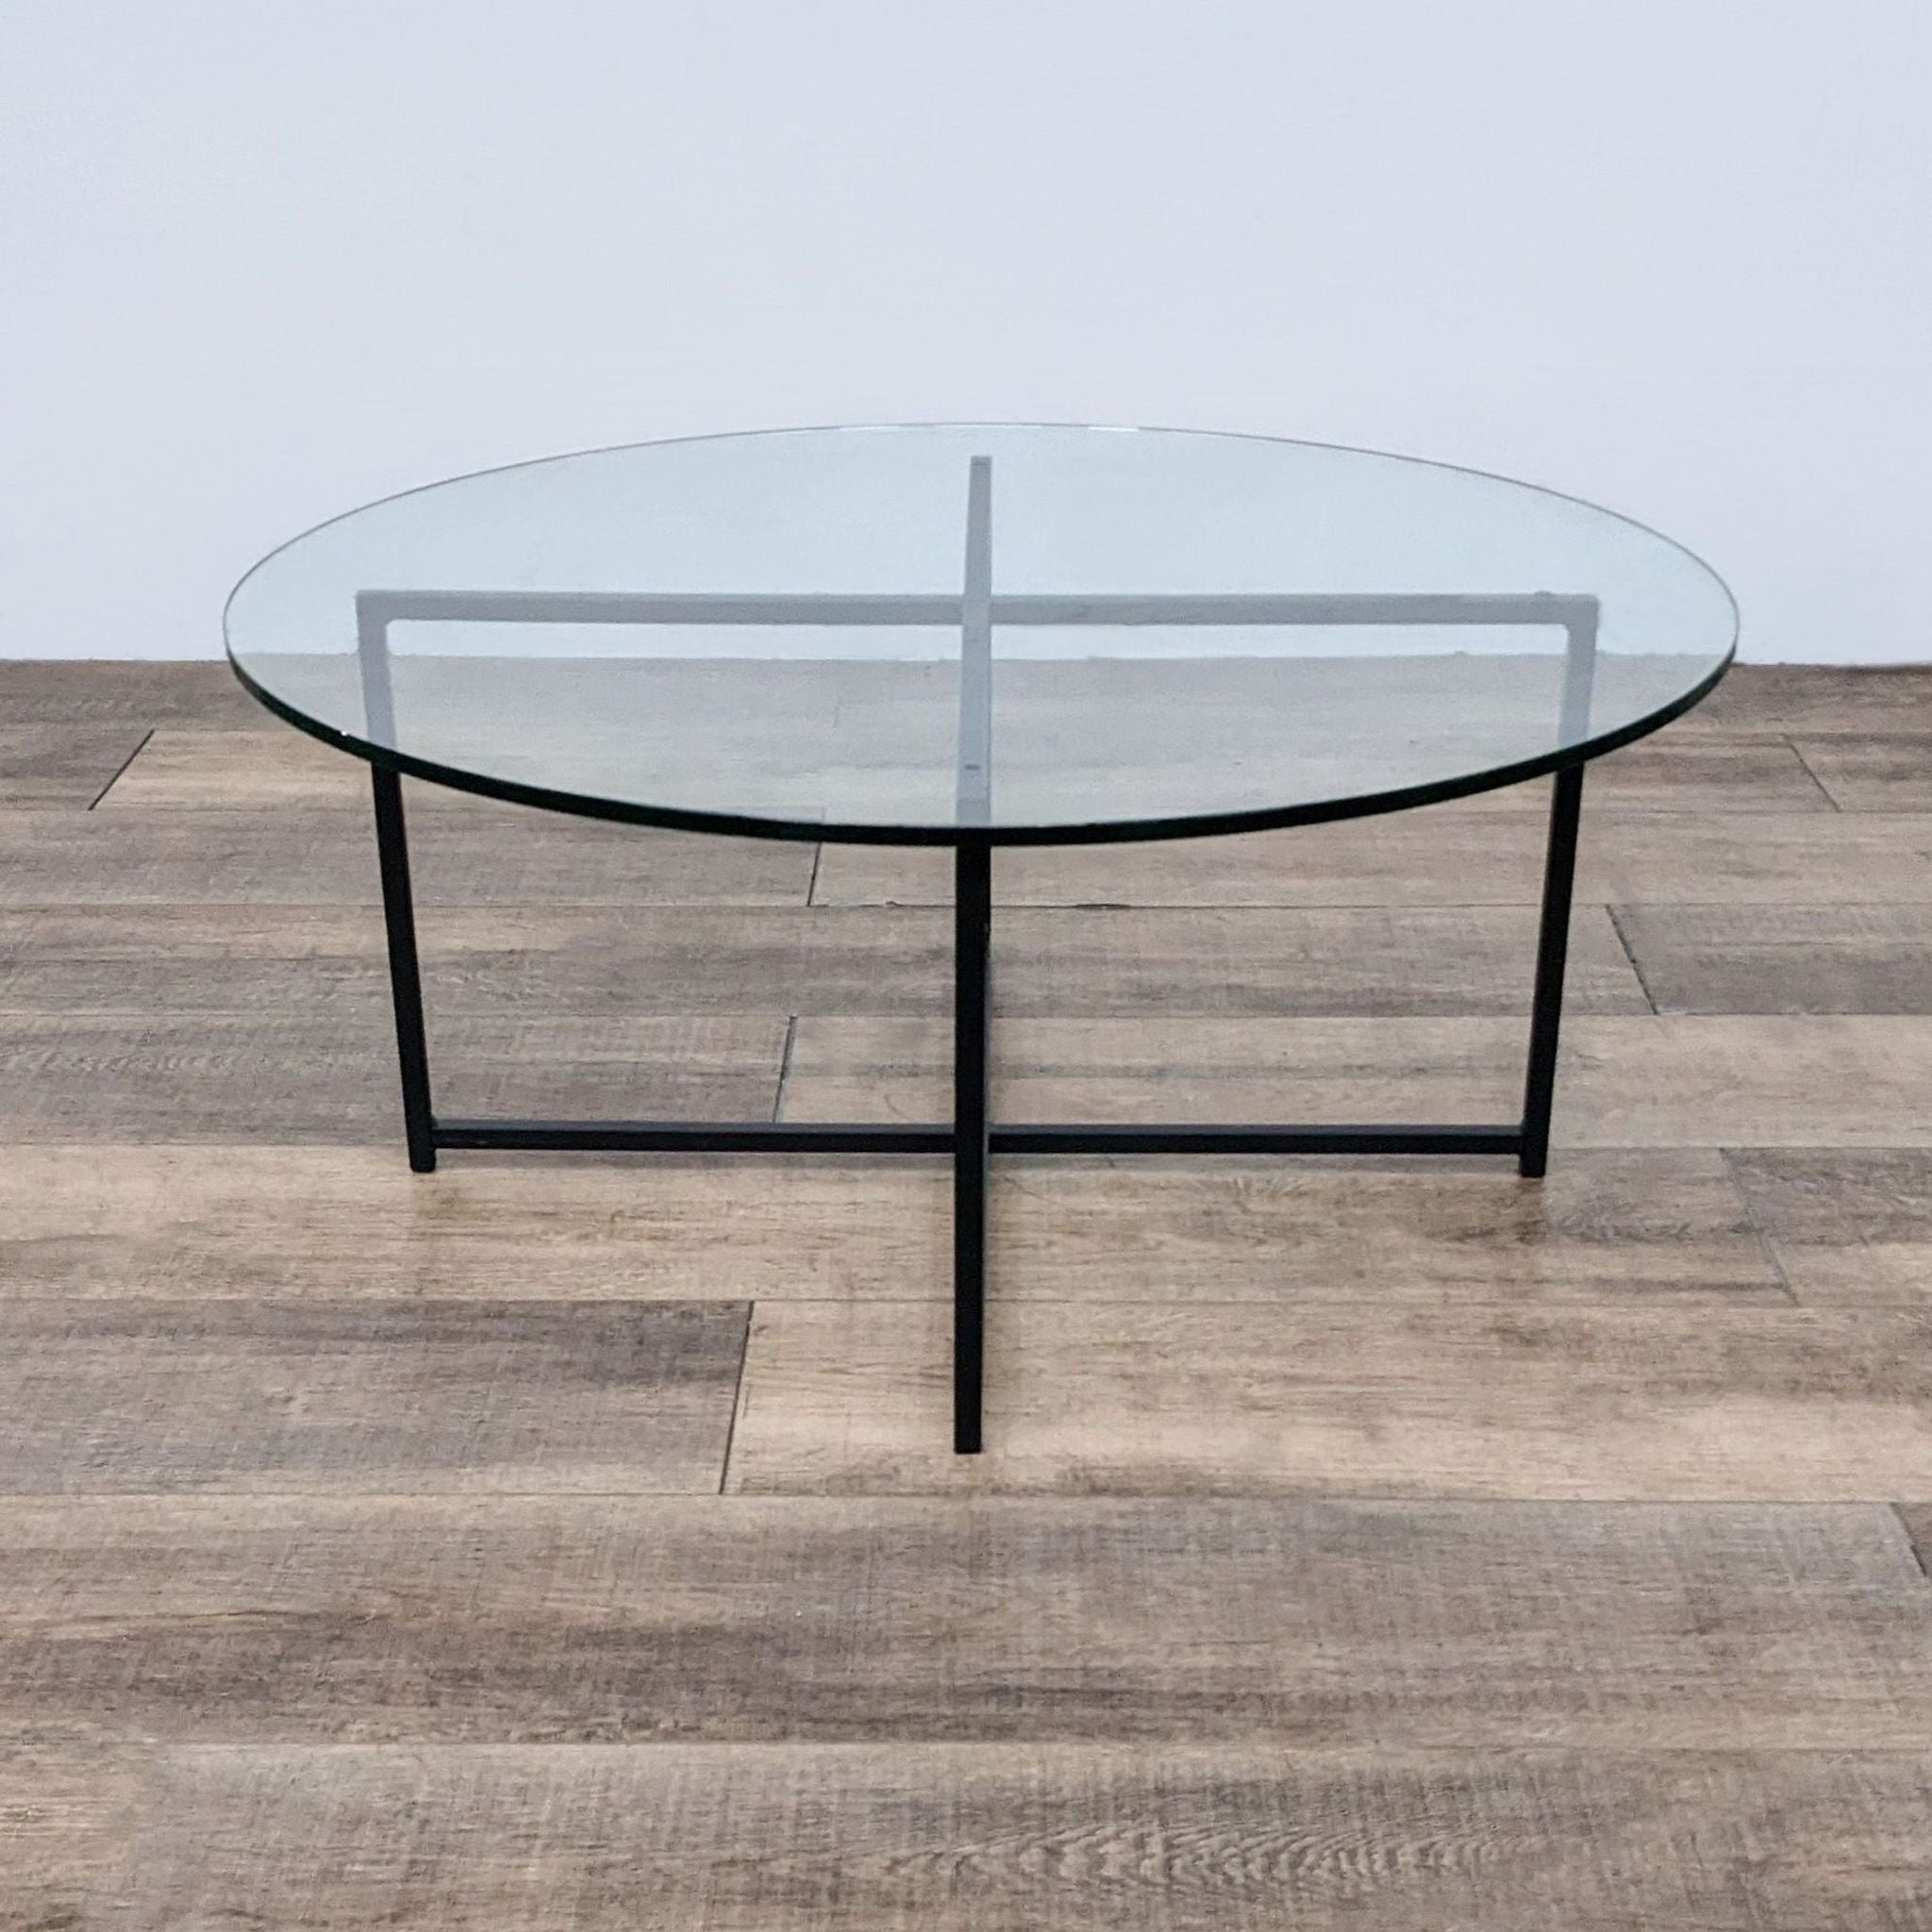 Room & Board brand coffee table with a circular glass top and minimalist black legs, set on a wooden floor.